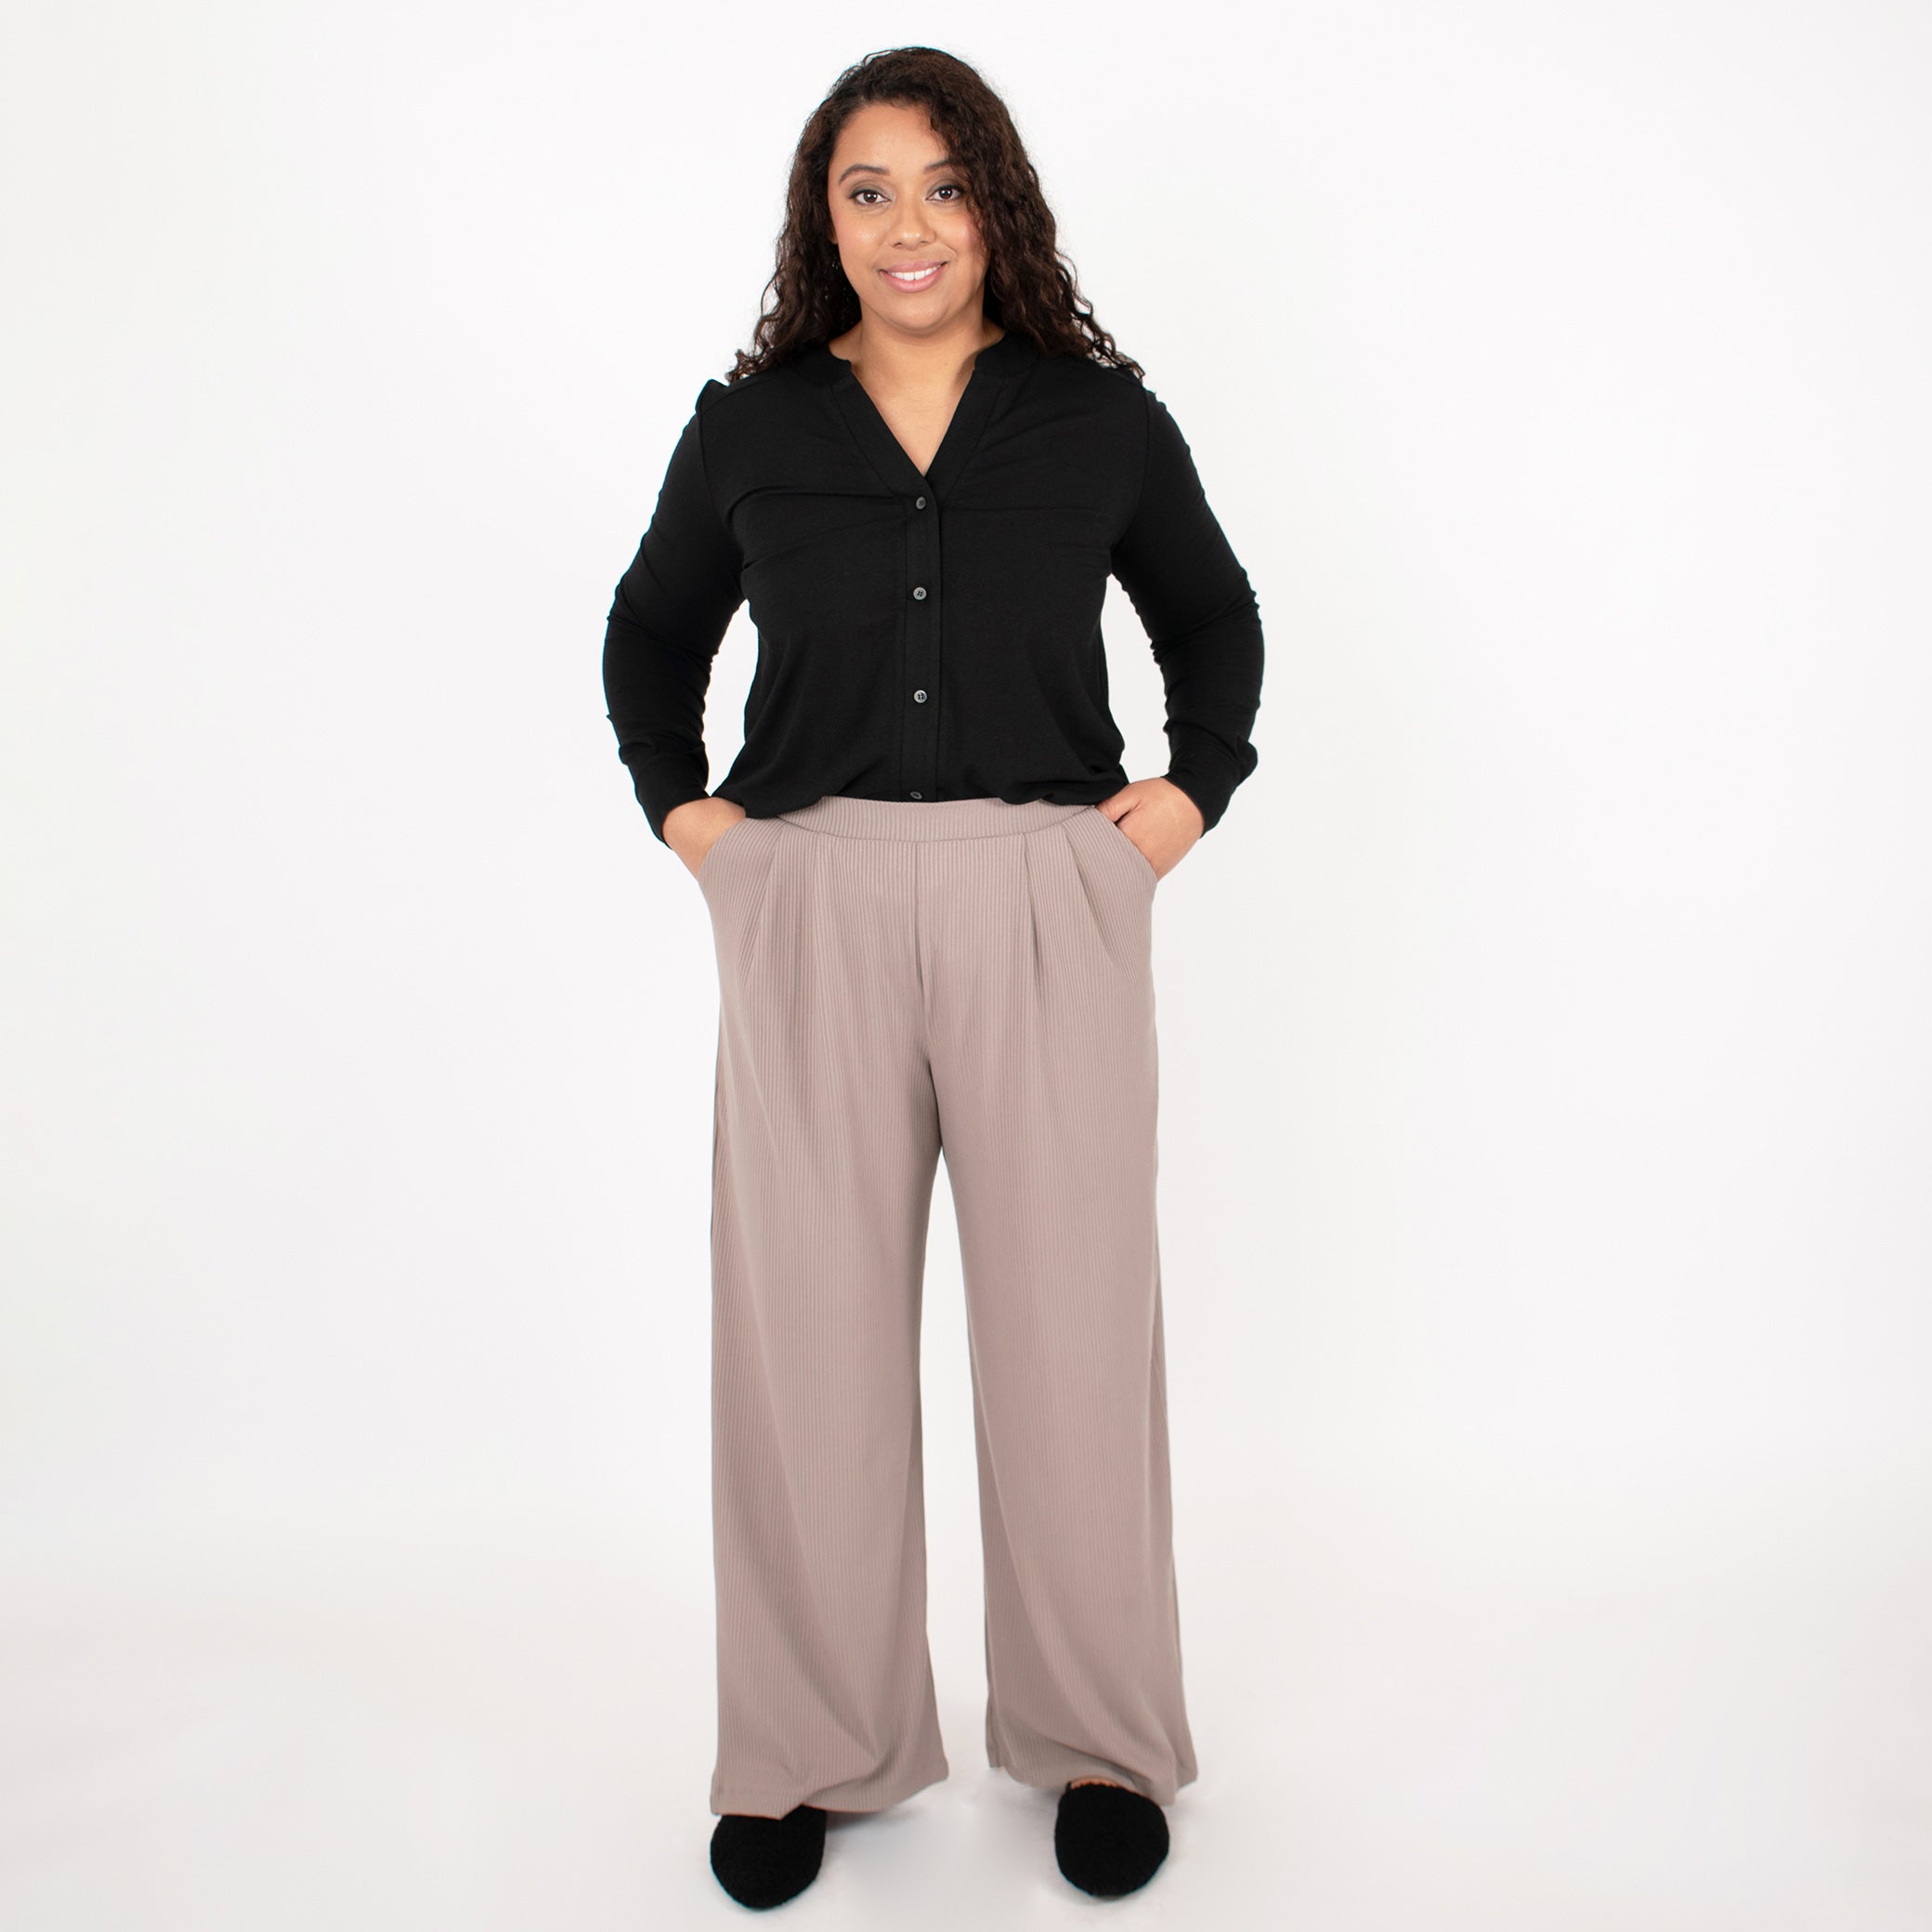 Woman wearing black long sleeve button up shirt with brown wide leg pants